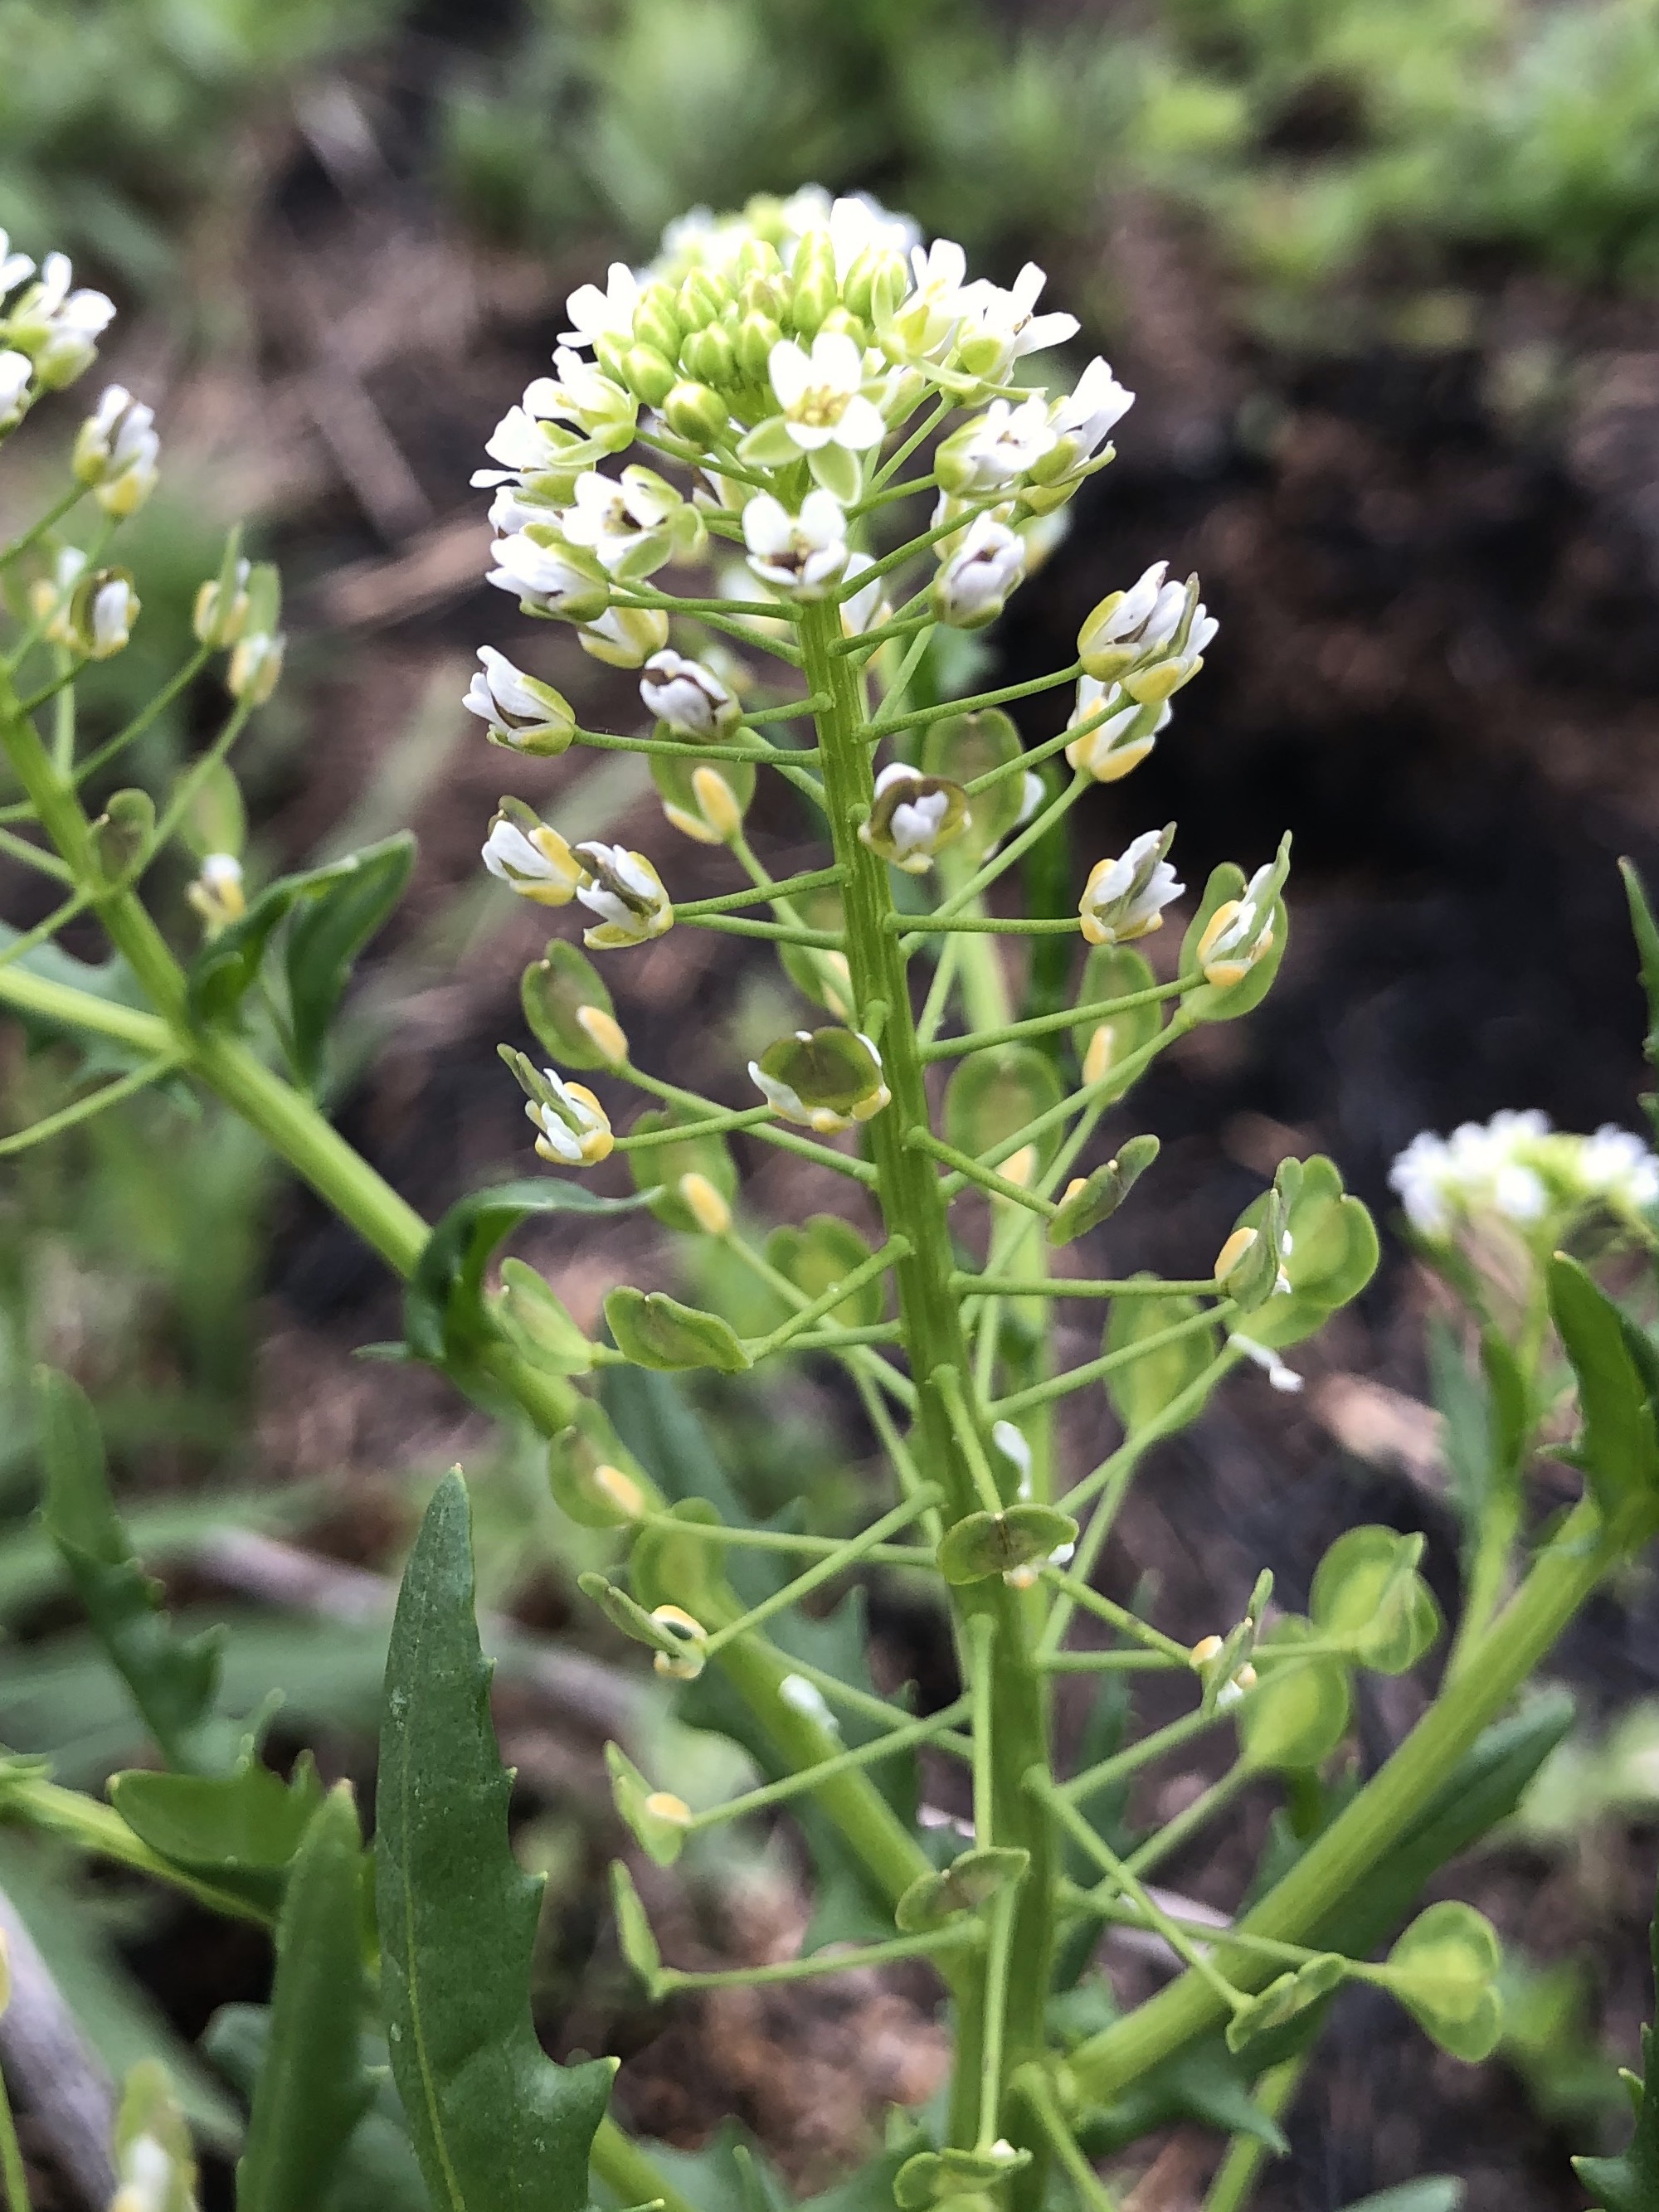 Field Pennycress in UW Arboretum's native gardens in Madison, Wisconsin on May 15, 2021.